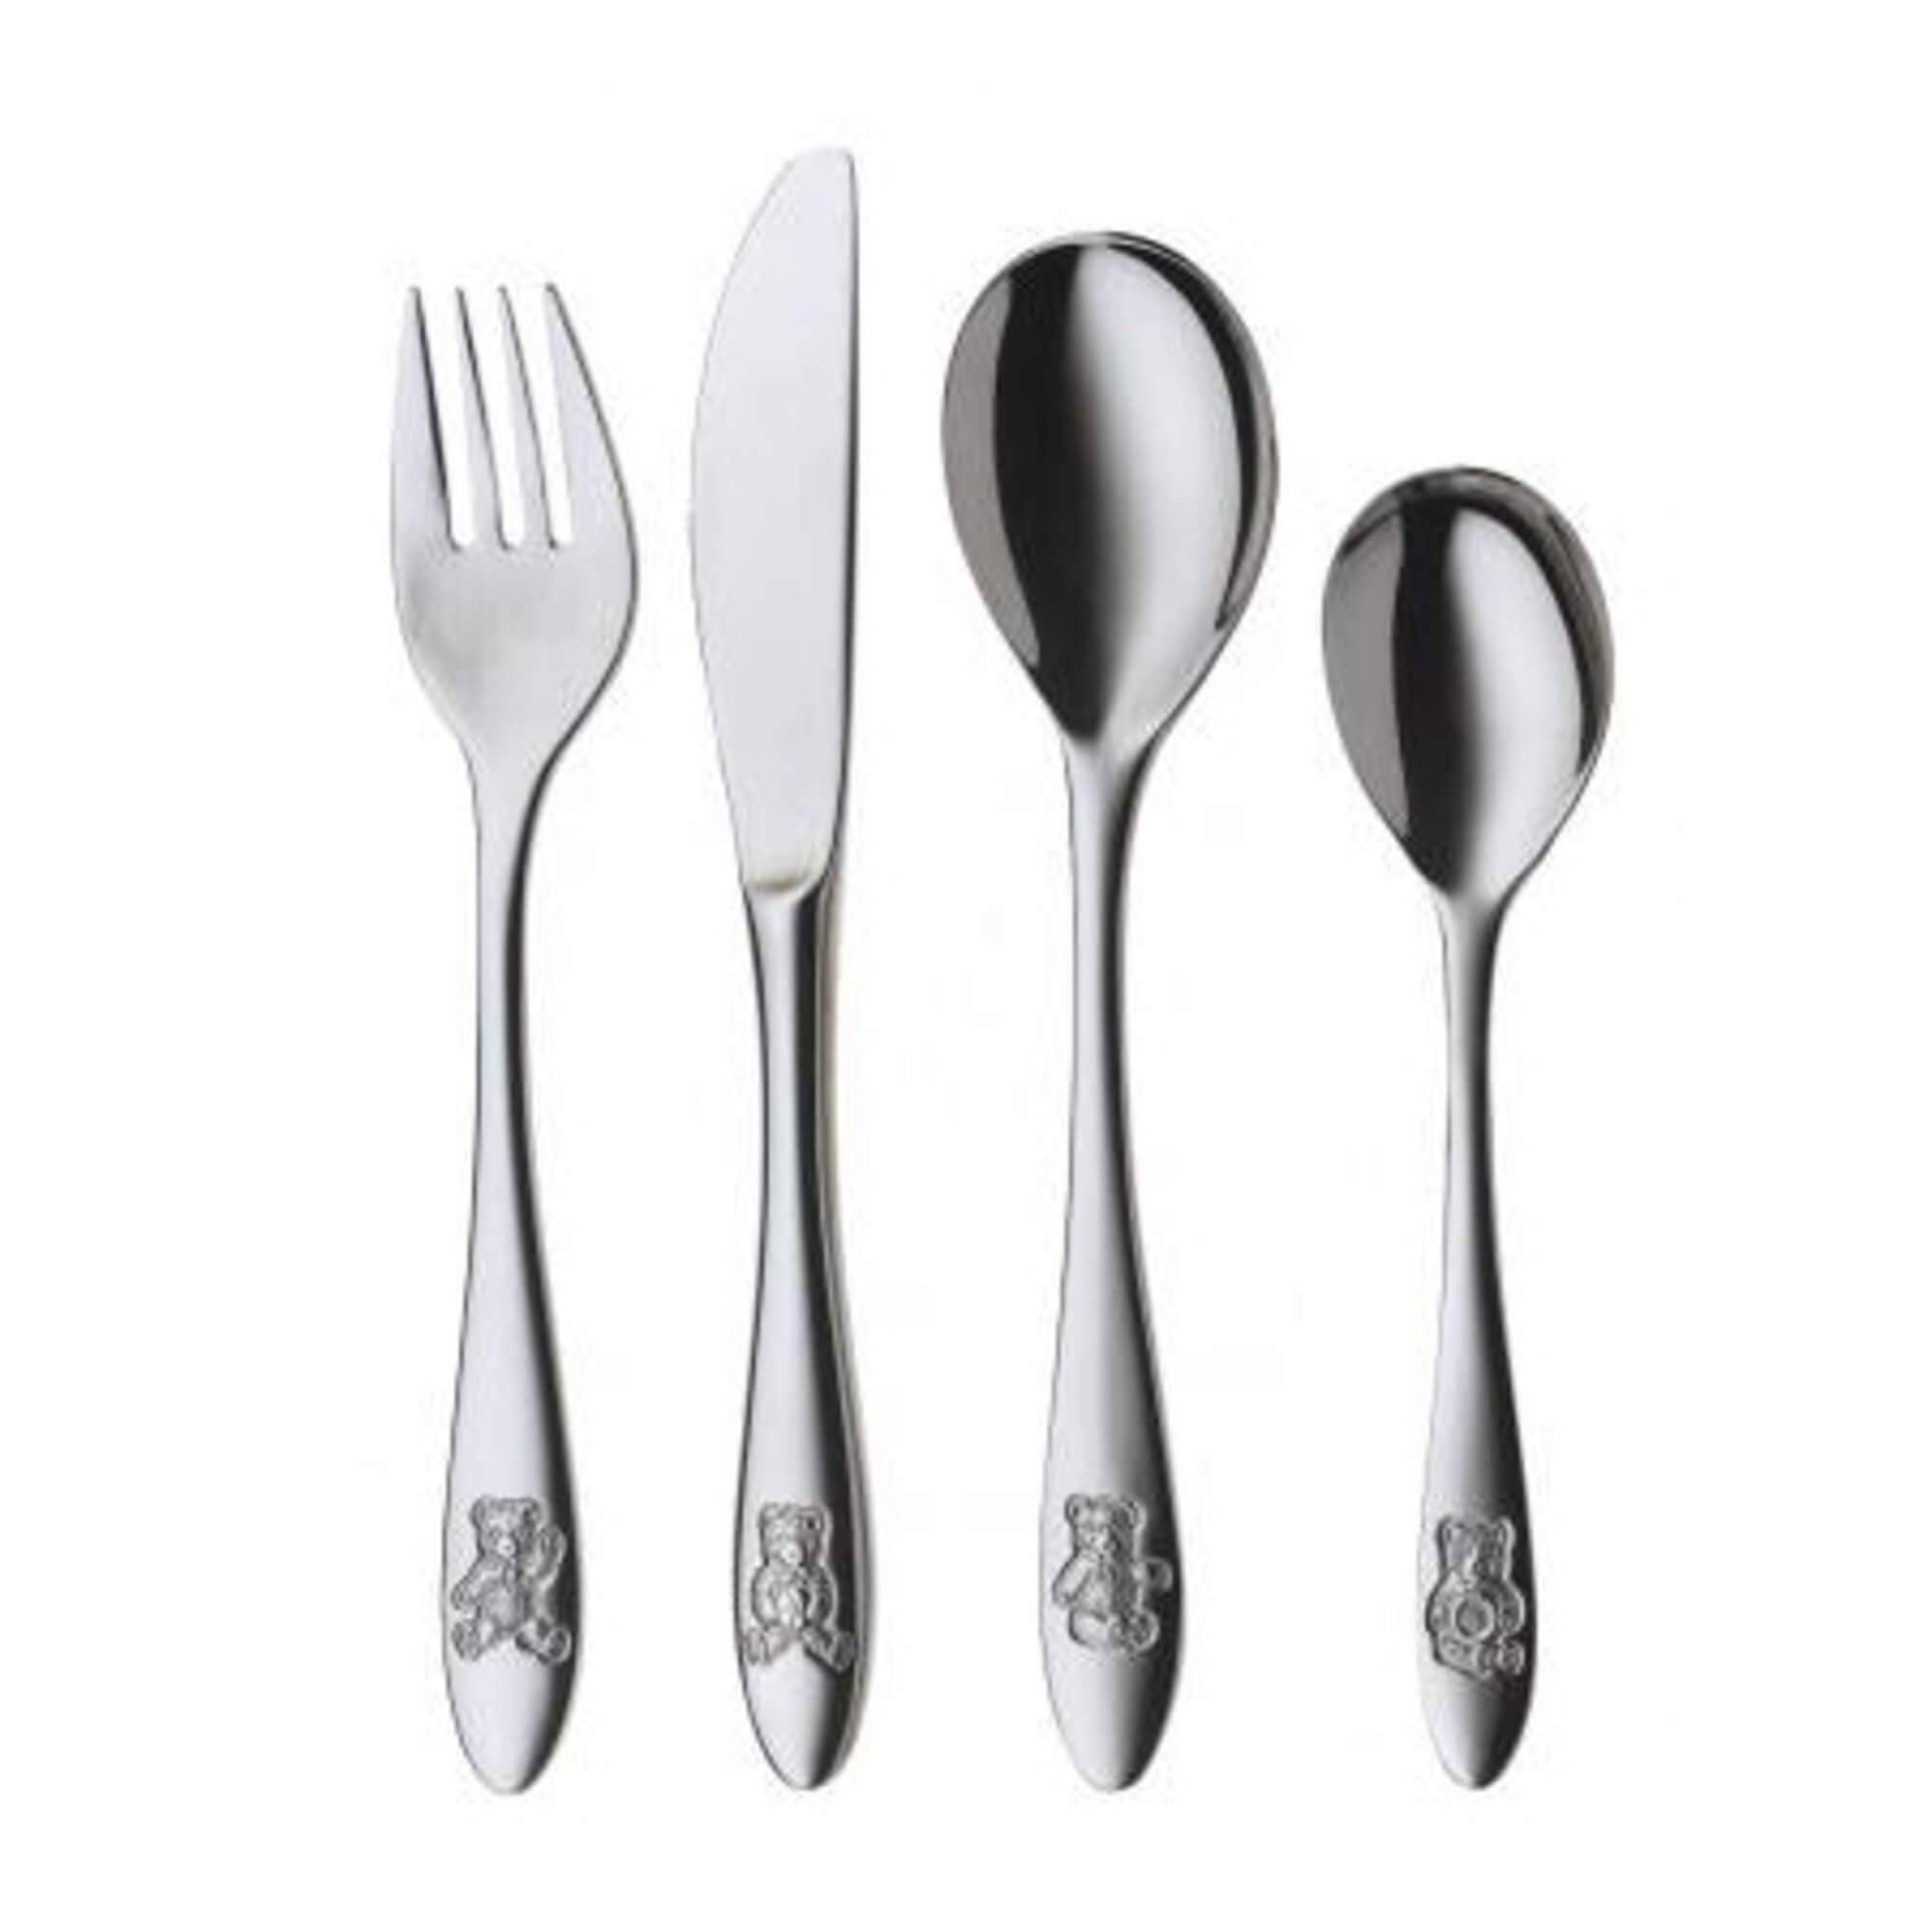 Silit Pezzy Kid's Cutlery Set 4pce